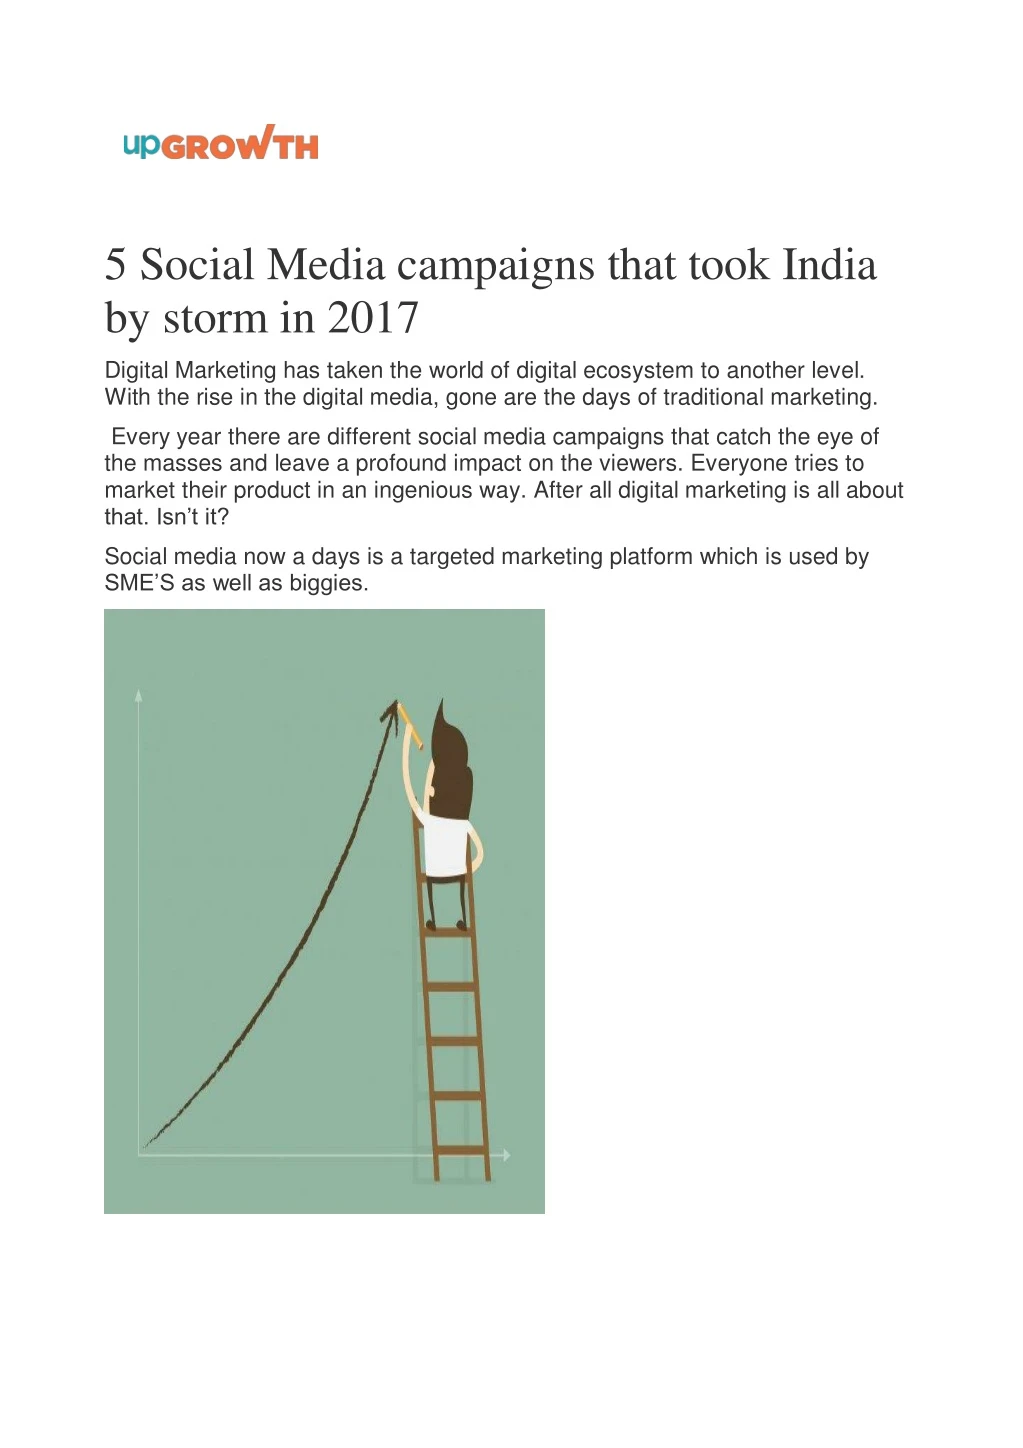 5 social media campaigns that took india by storm